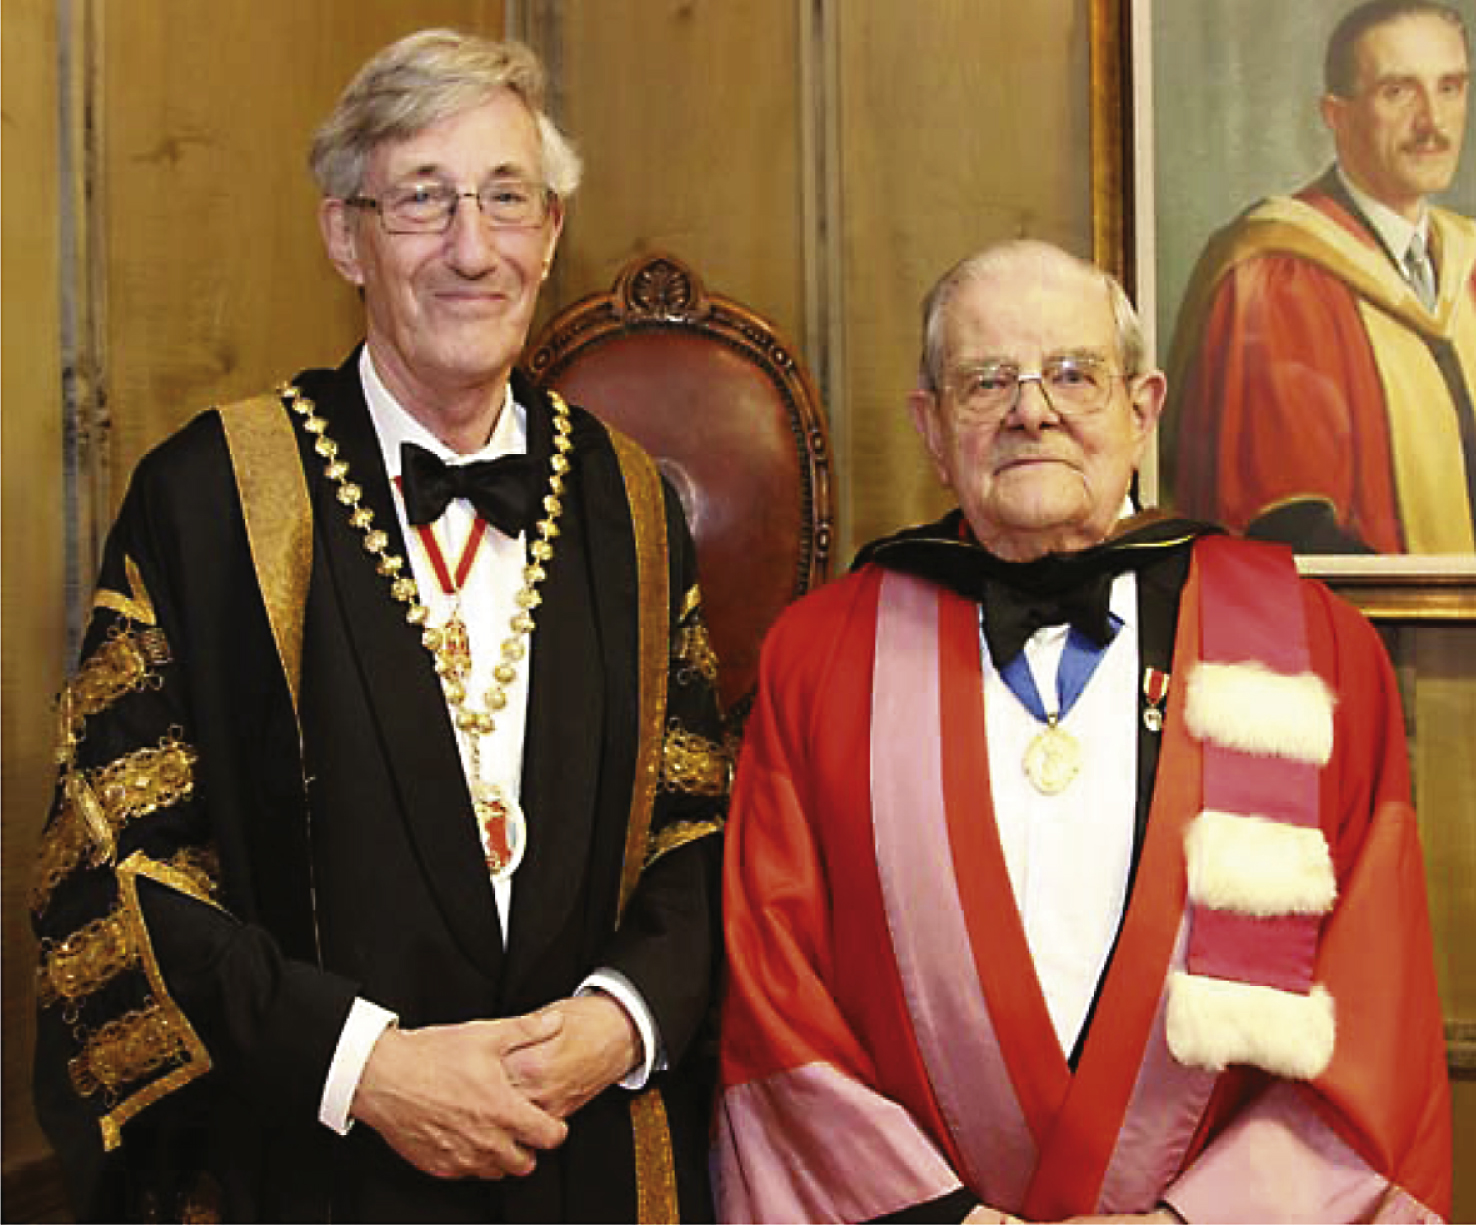 Professor Sir Michael Rawlins (Ruth and Lionel Jacobson Professor of Clinical Pharmacology at the University of Newcastle, President of the Royal Society of Medicine) presenting John Walton with the RSM Medal in 2004.